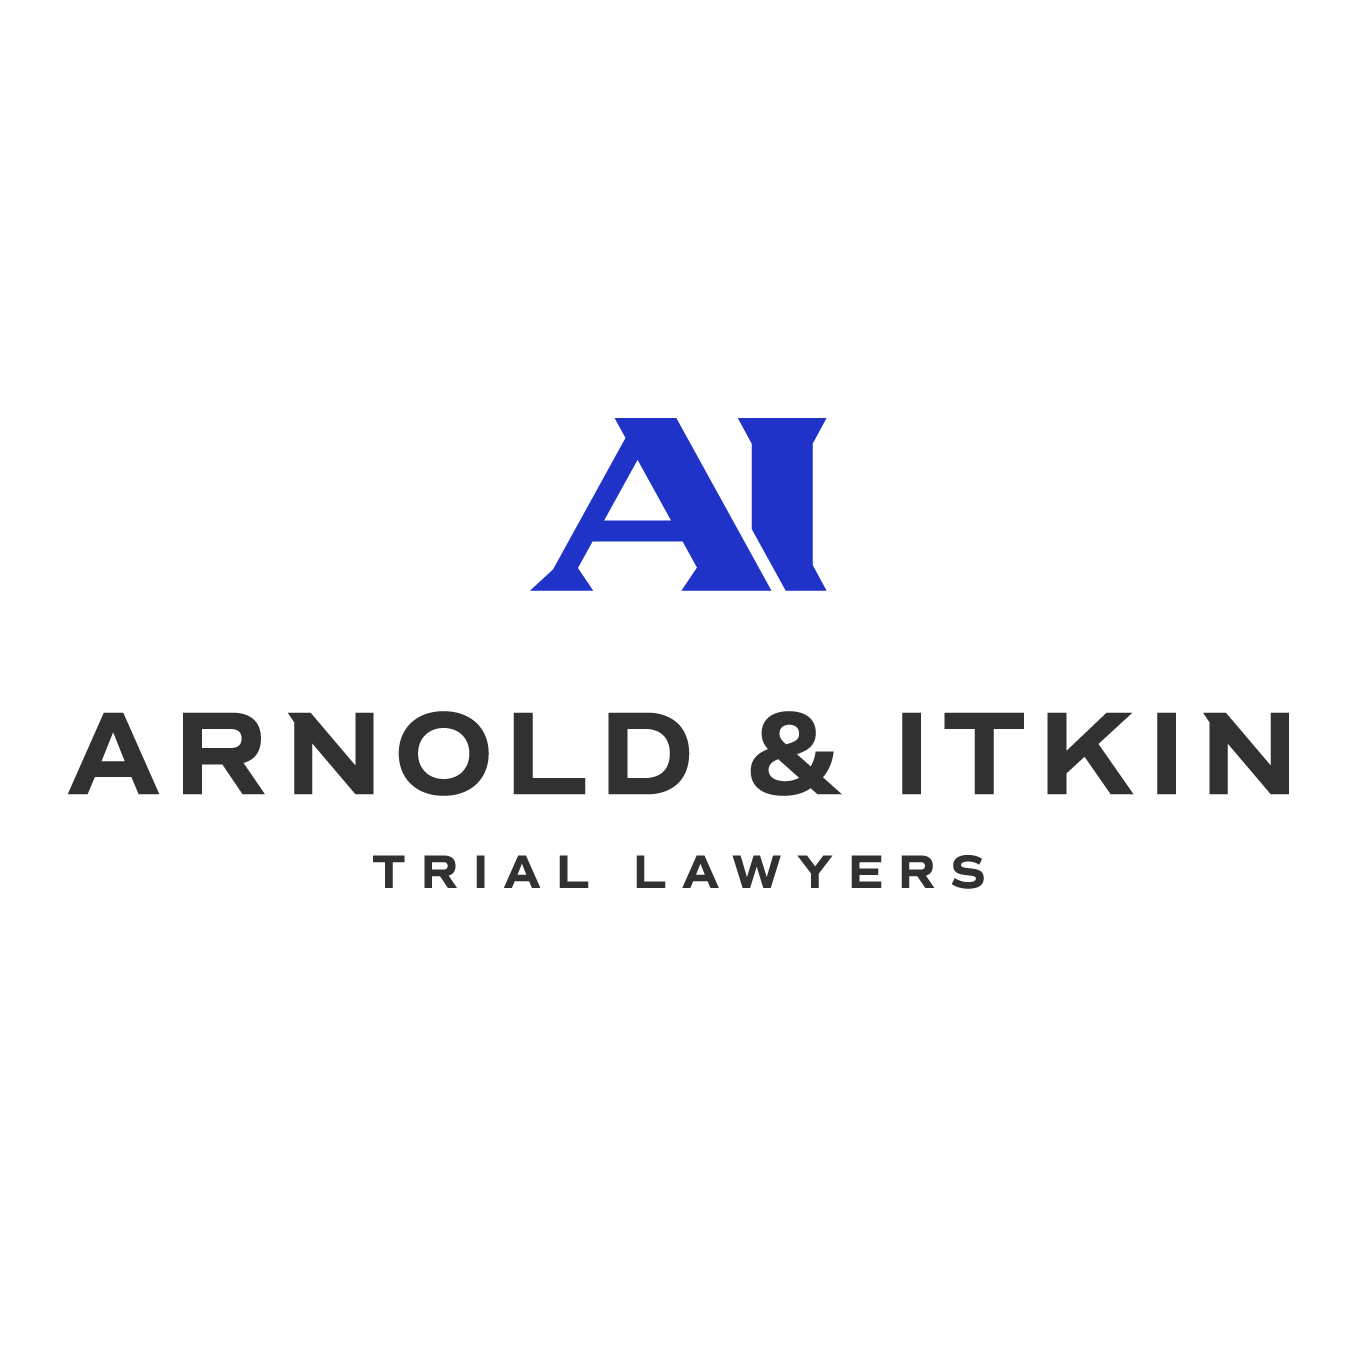 Arnold & Itkin LLP - Houston, TX 77007 - (713)222-3800 | ShowMeLocal.com